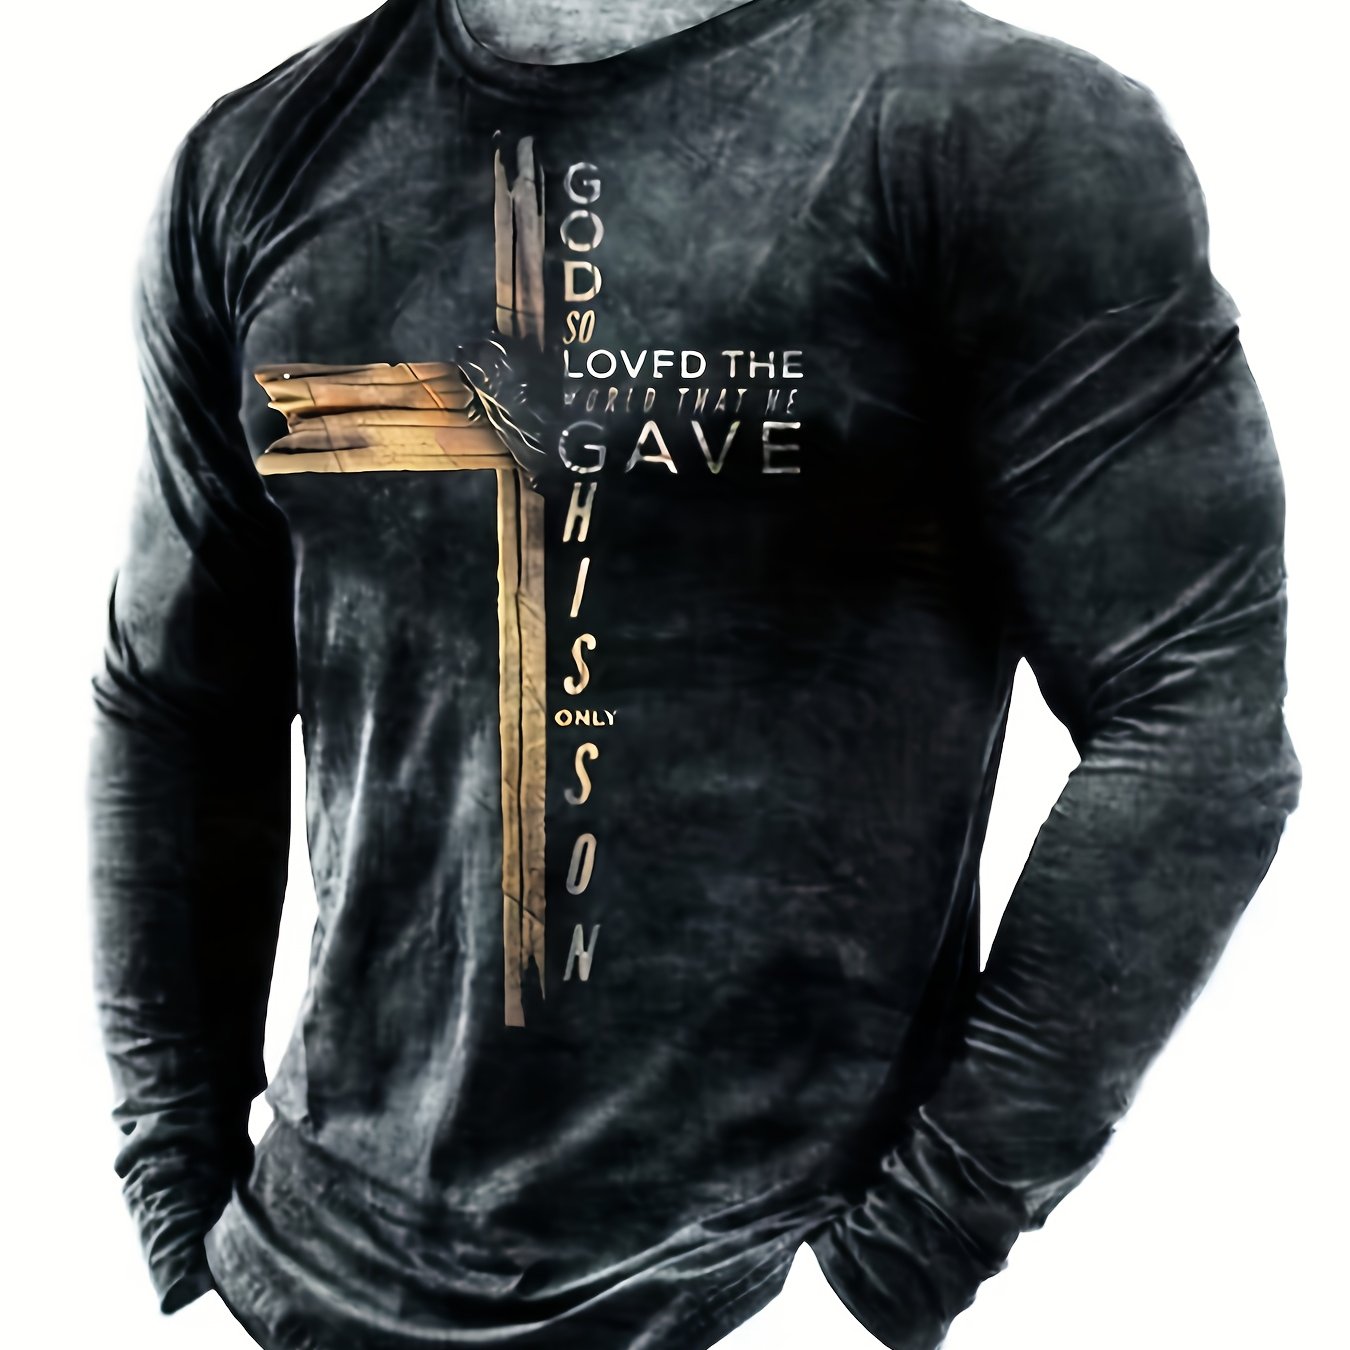 Classic Cross And Letter Print Men's Creative Long Sleeve Crew Neck T-shirt For Spring Fall, Gift For Men